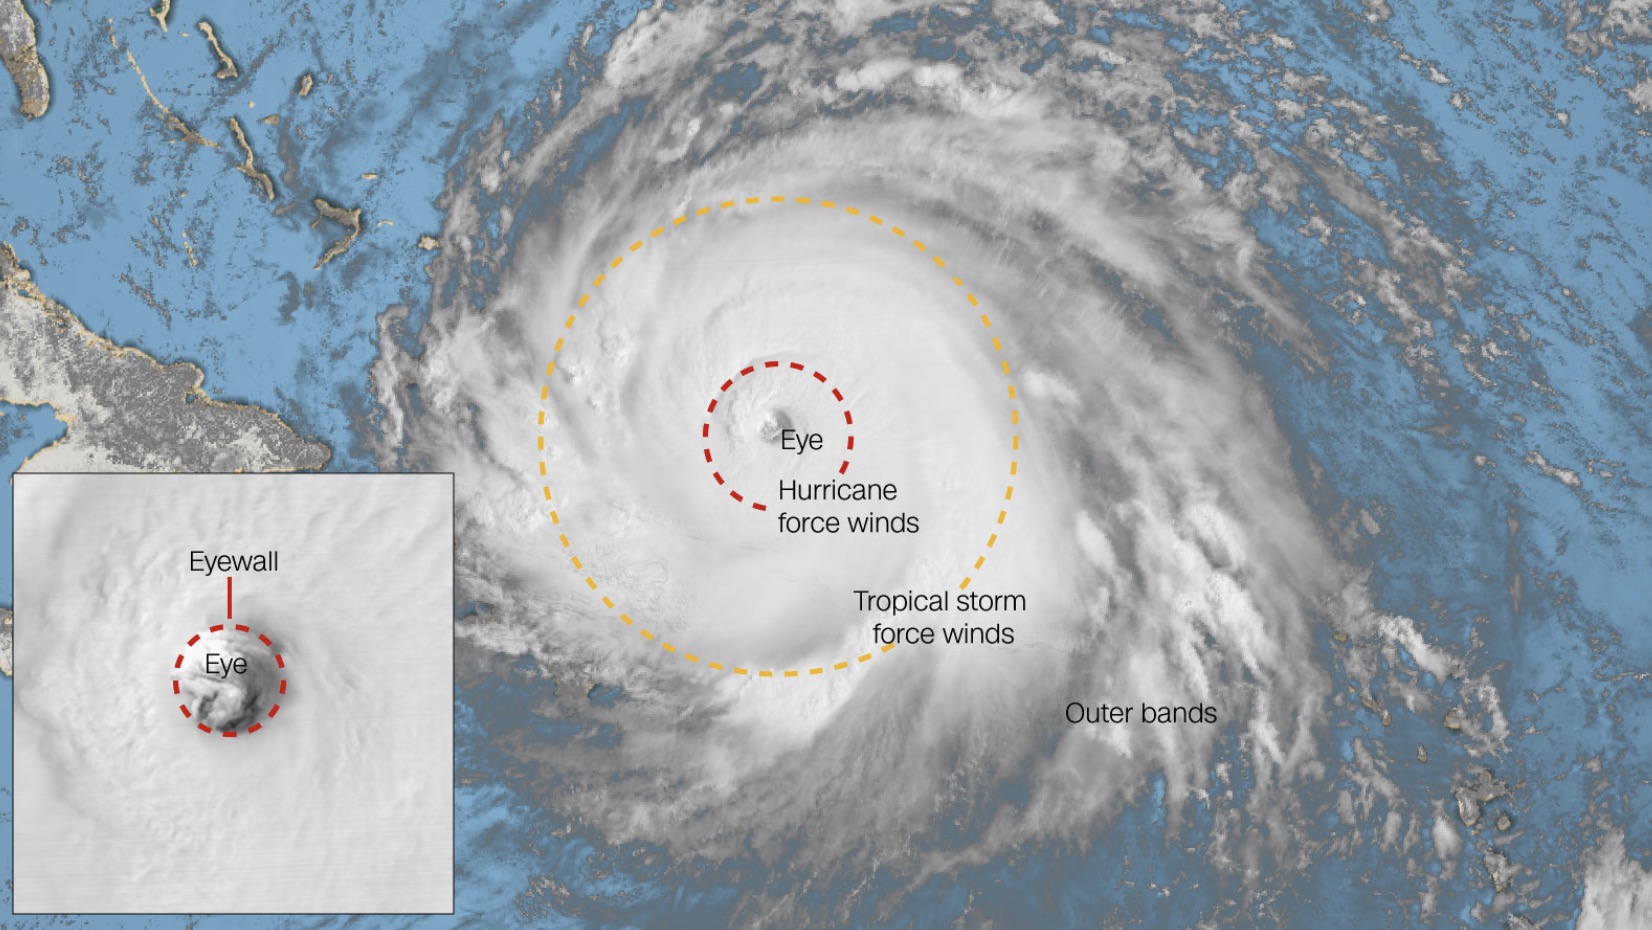 From the eye to storm surge: The anatomy of a hurricane